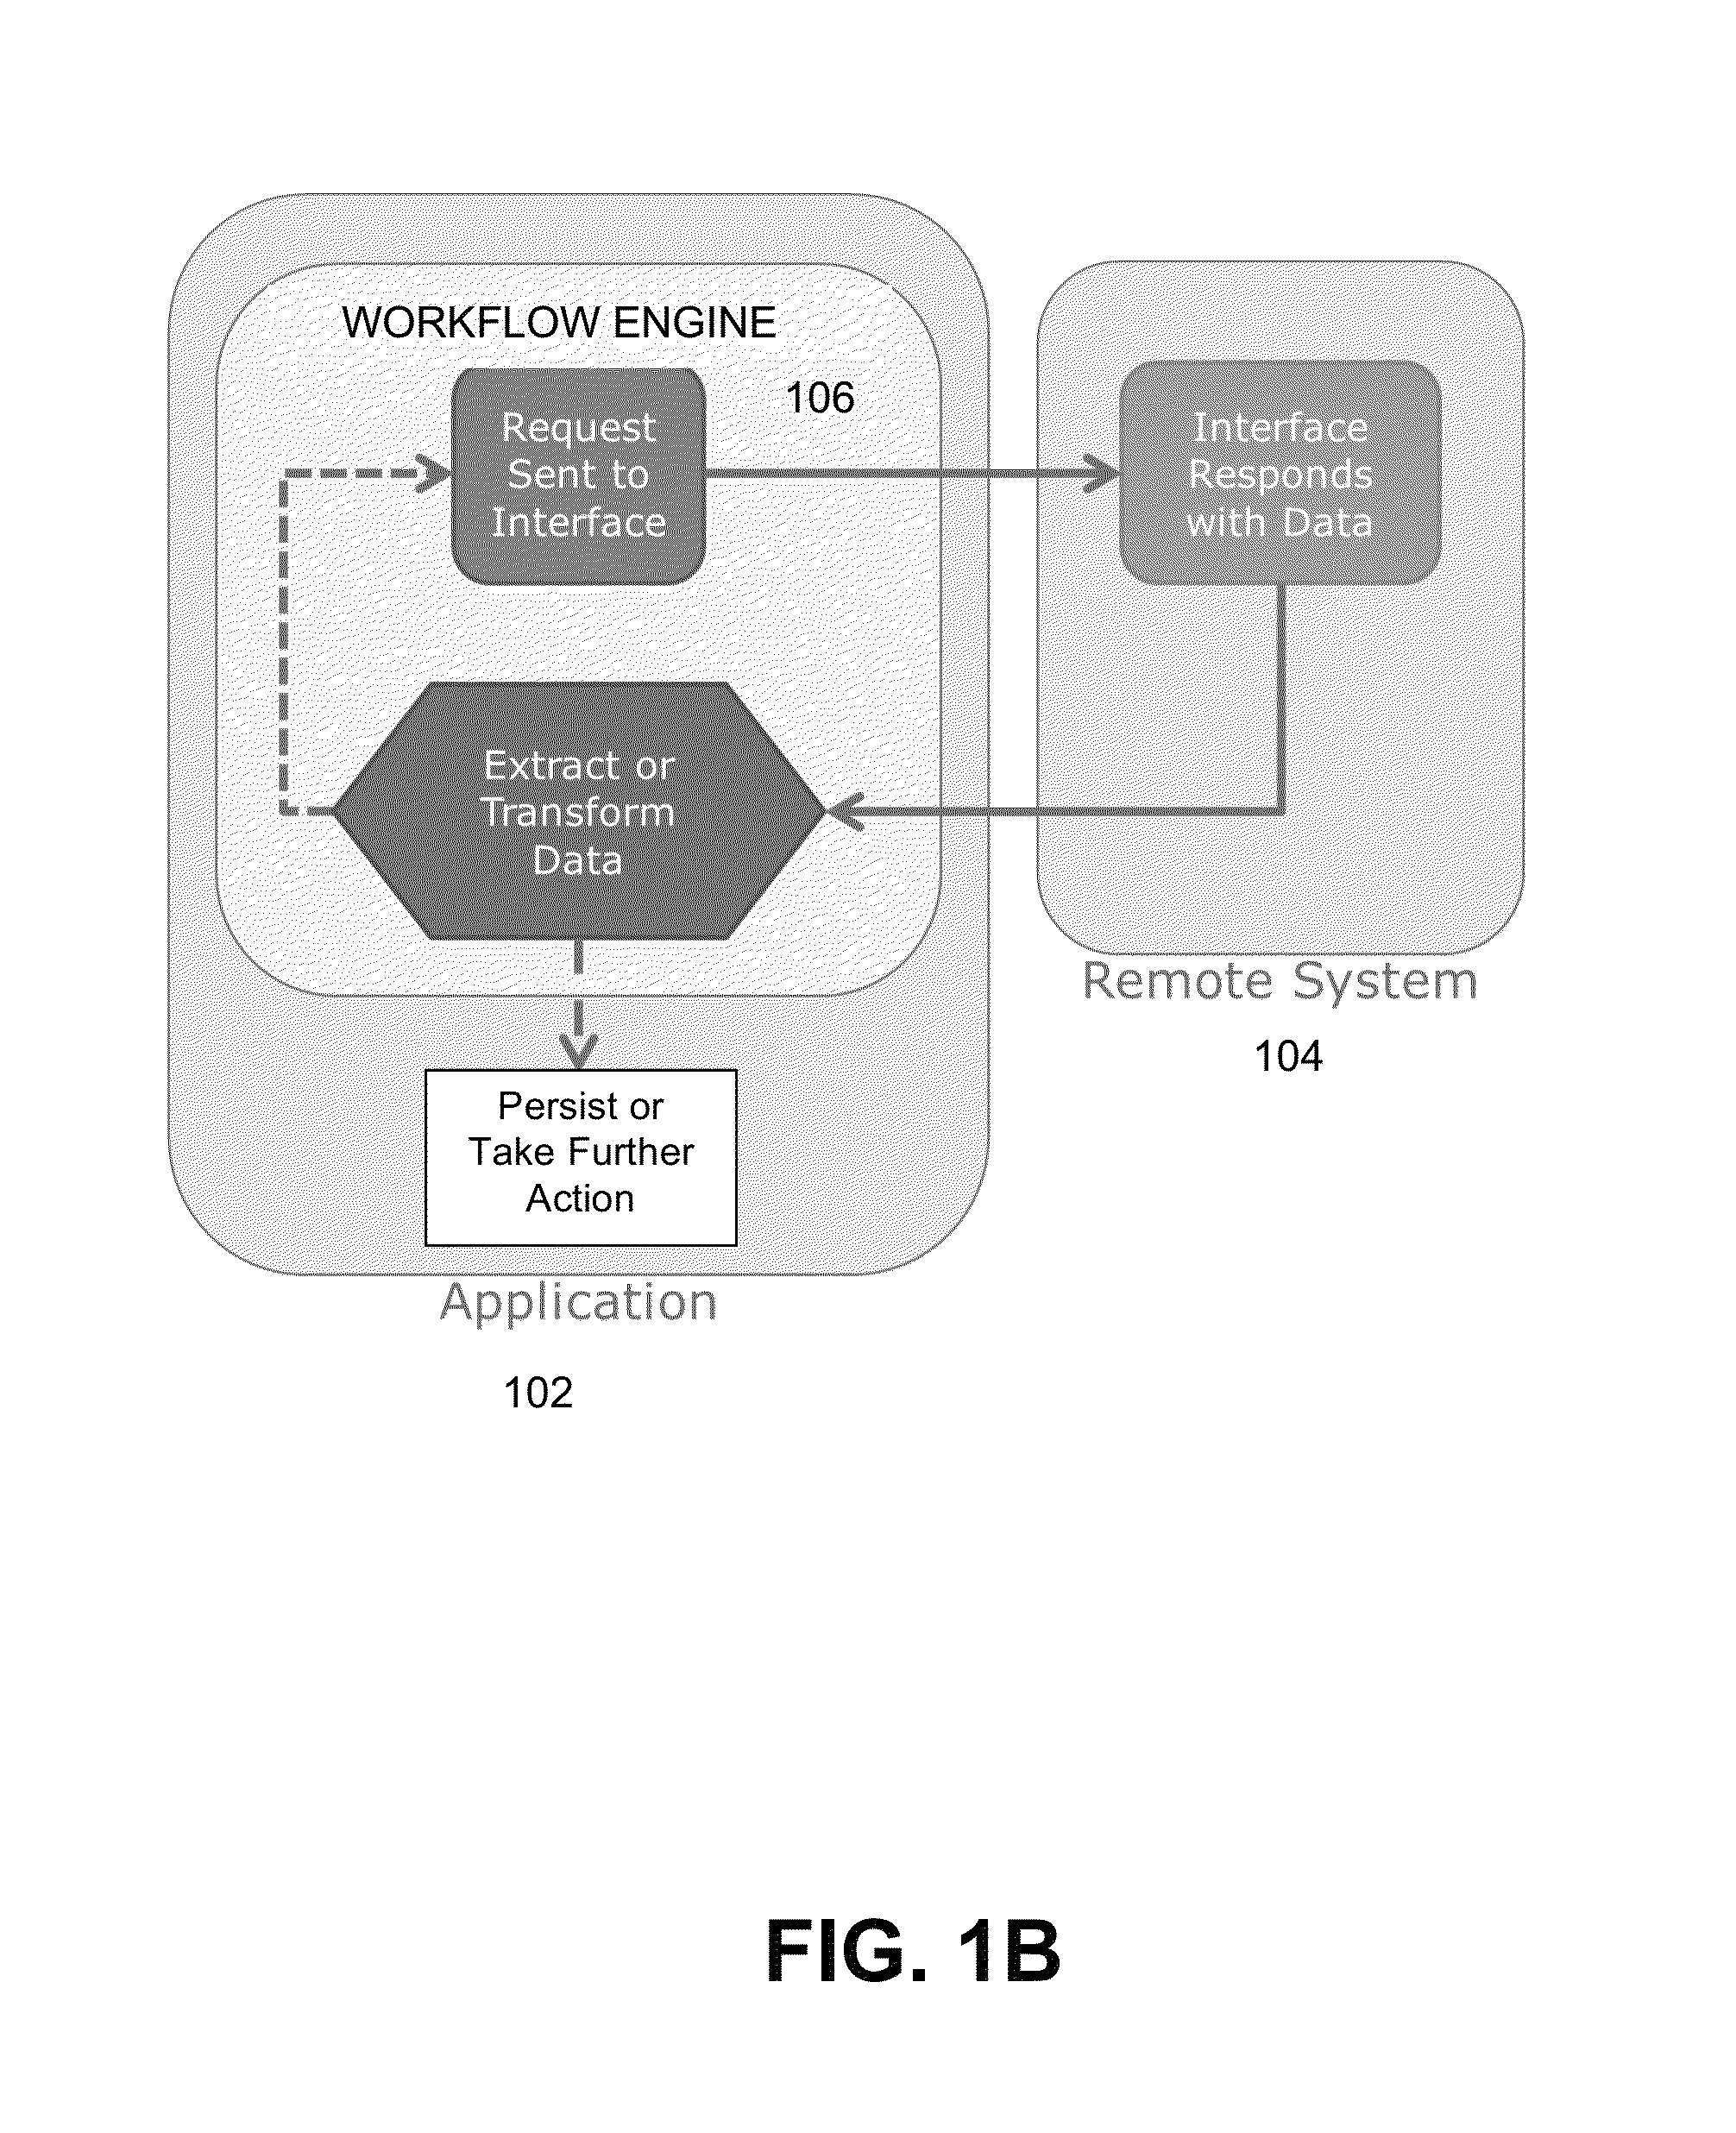 Execution plan generator and execution engine for interfacing with application programming interfaces